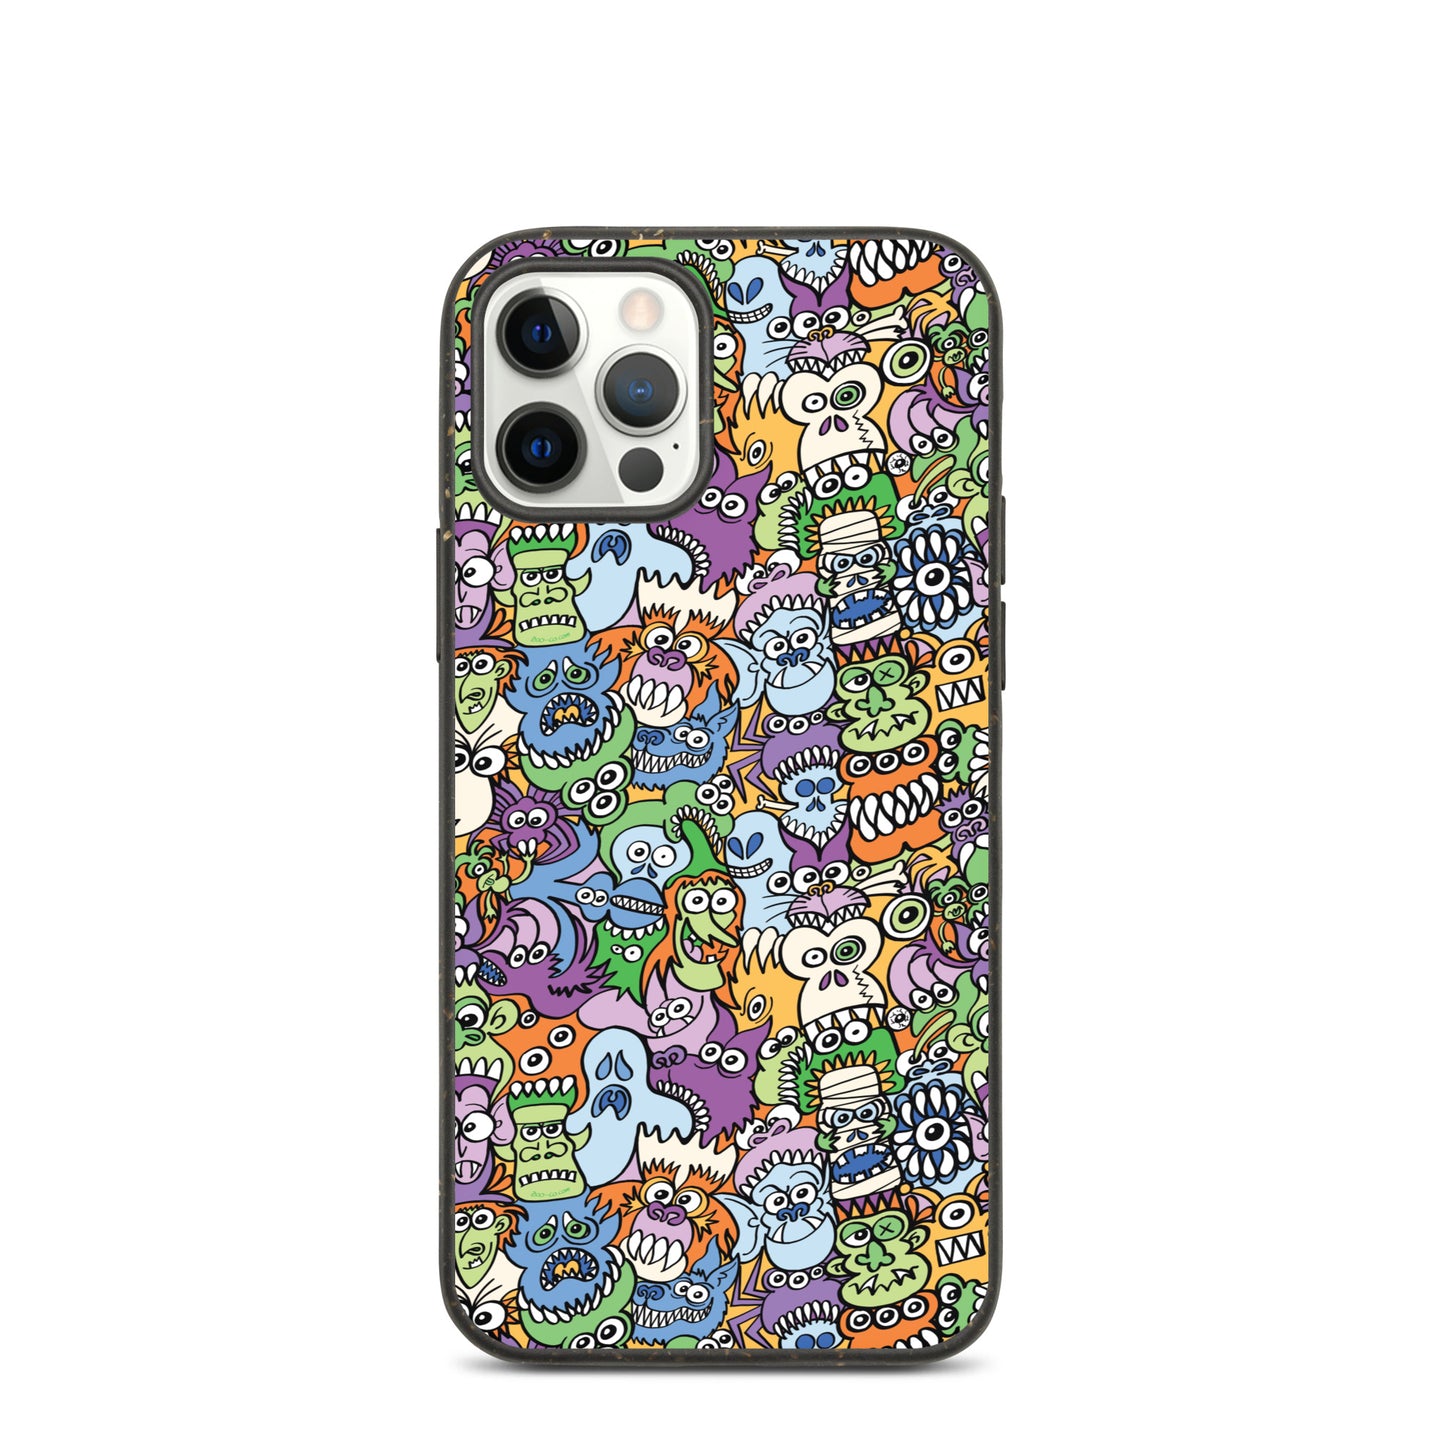 All the spooky Halloween monsters in a pattern design Speckled iPhone case. iphone 12 pro